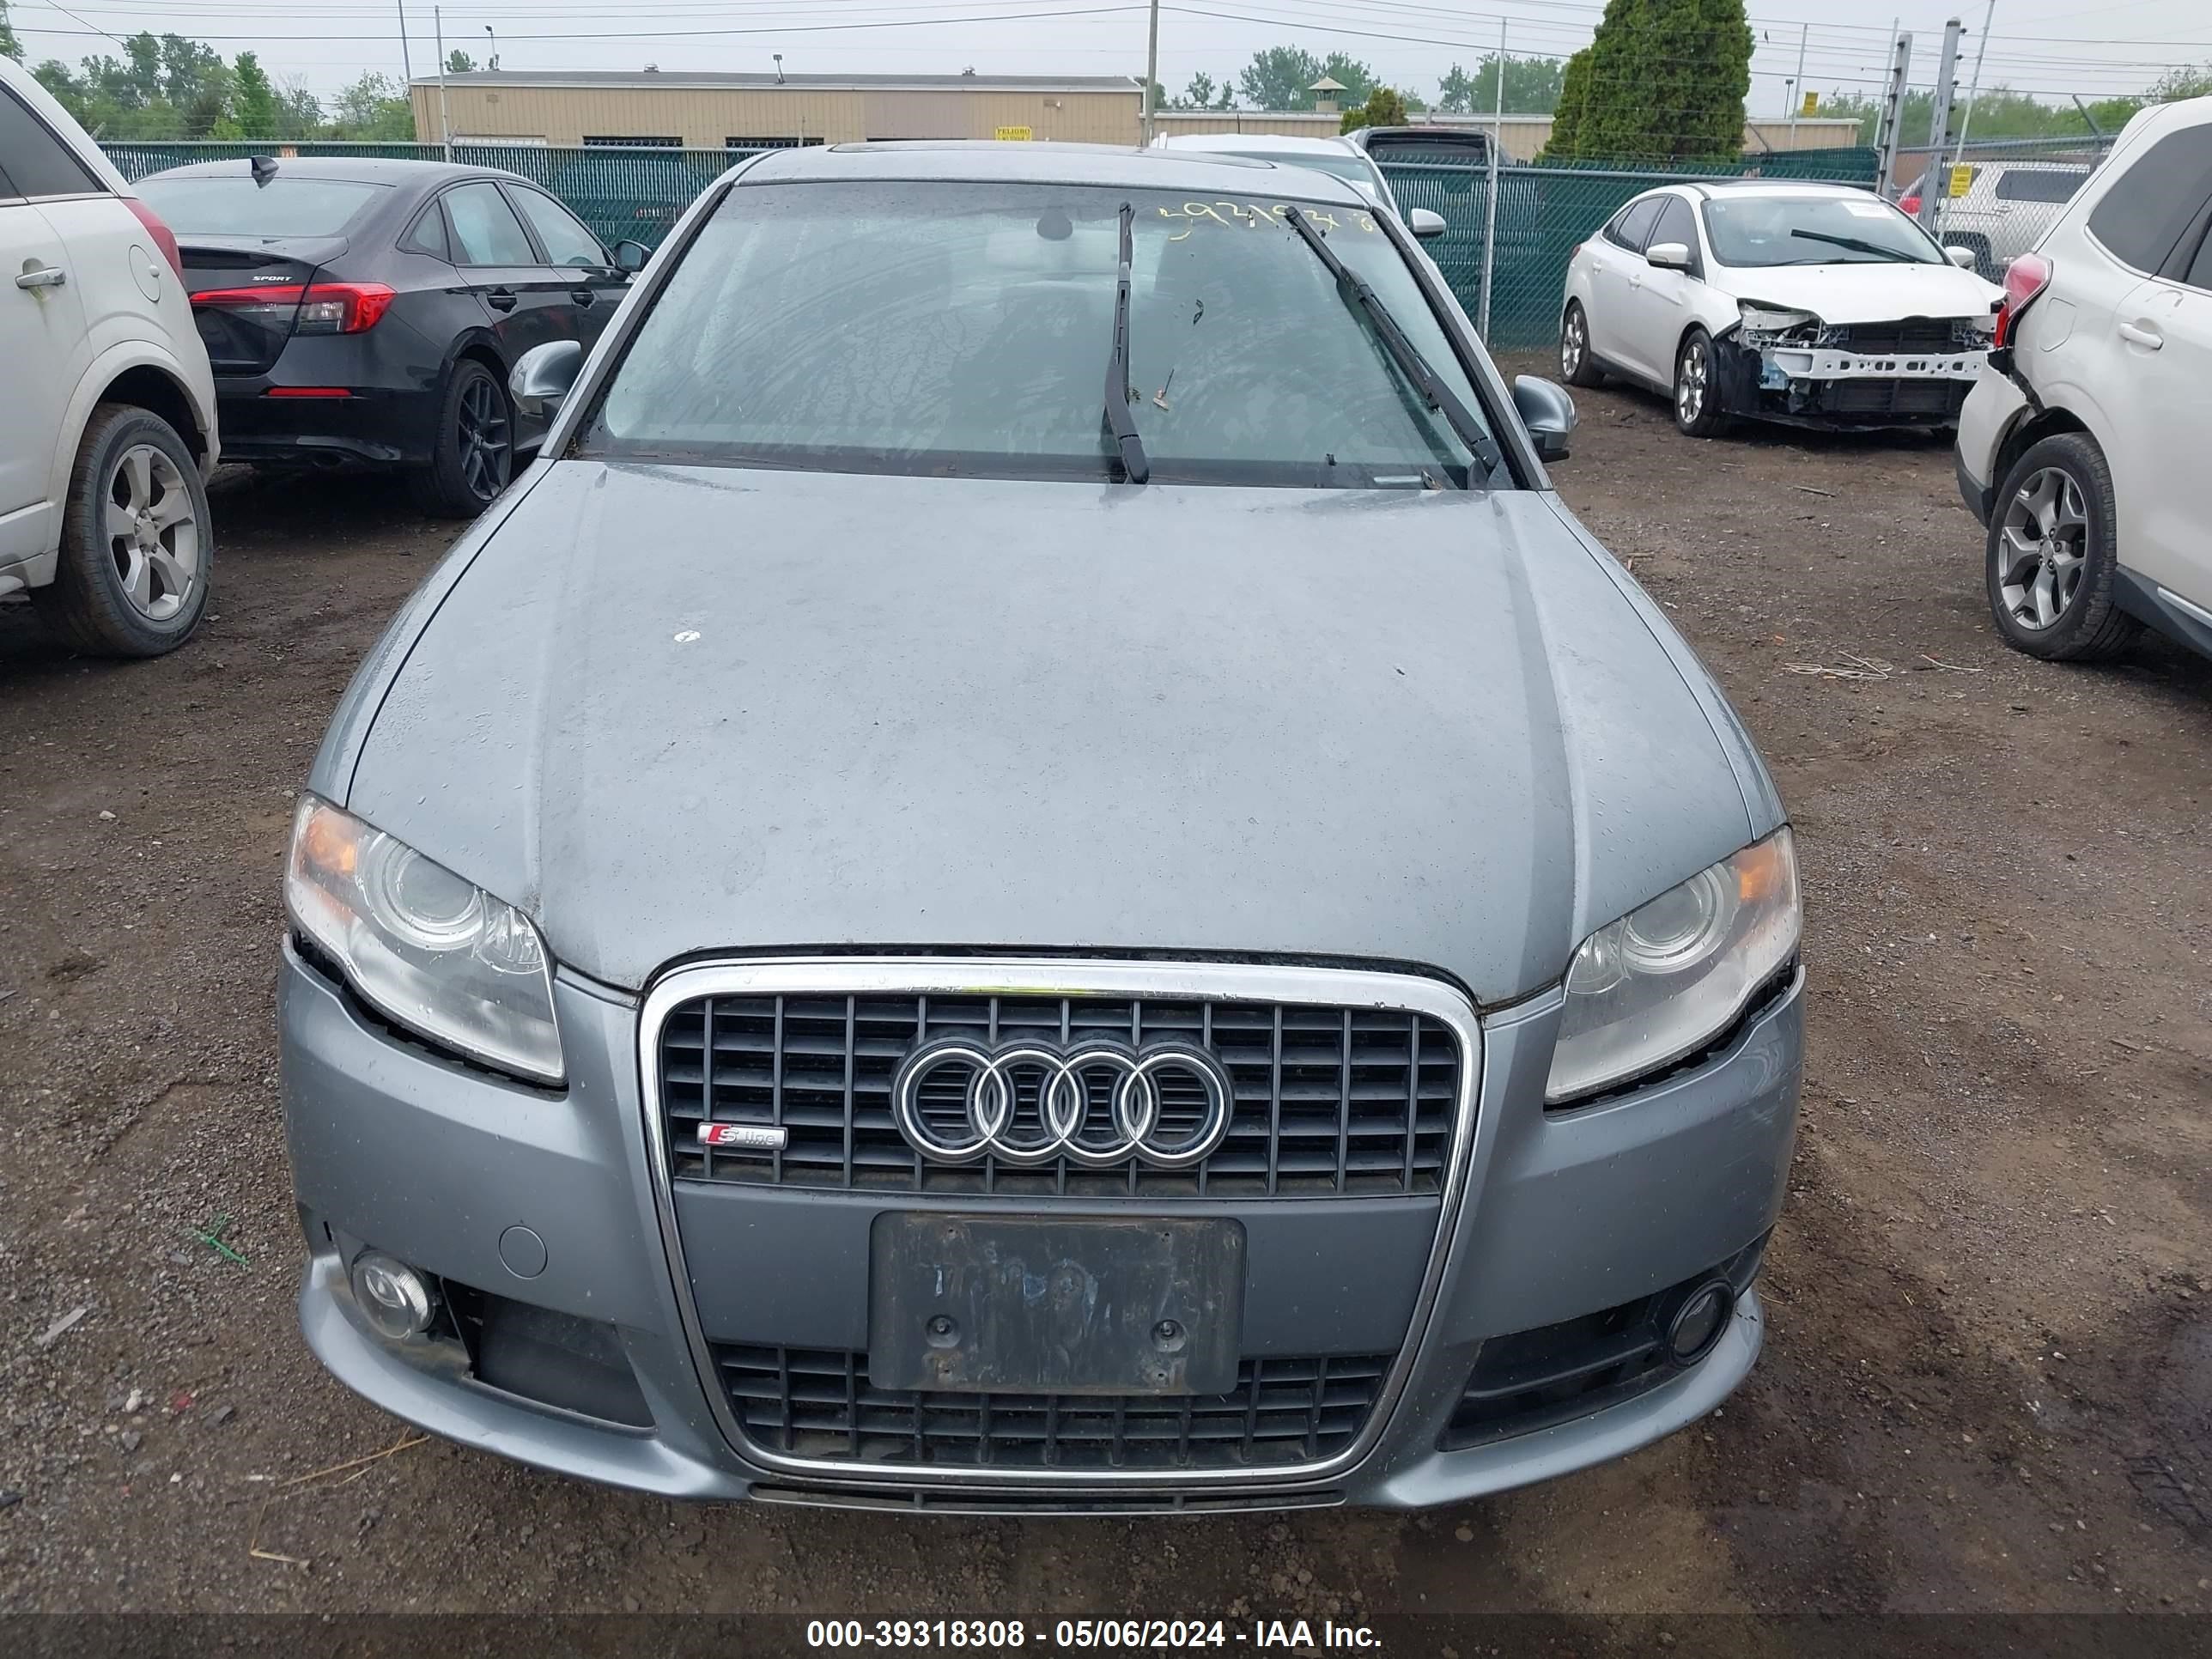 WAUDF78E28A147061 2008 Audi A4 2.0T/2.0T Special Edition